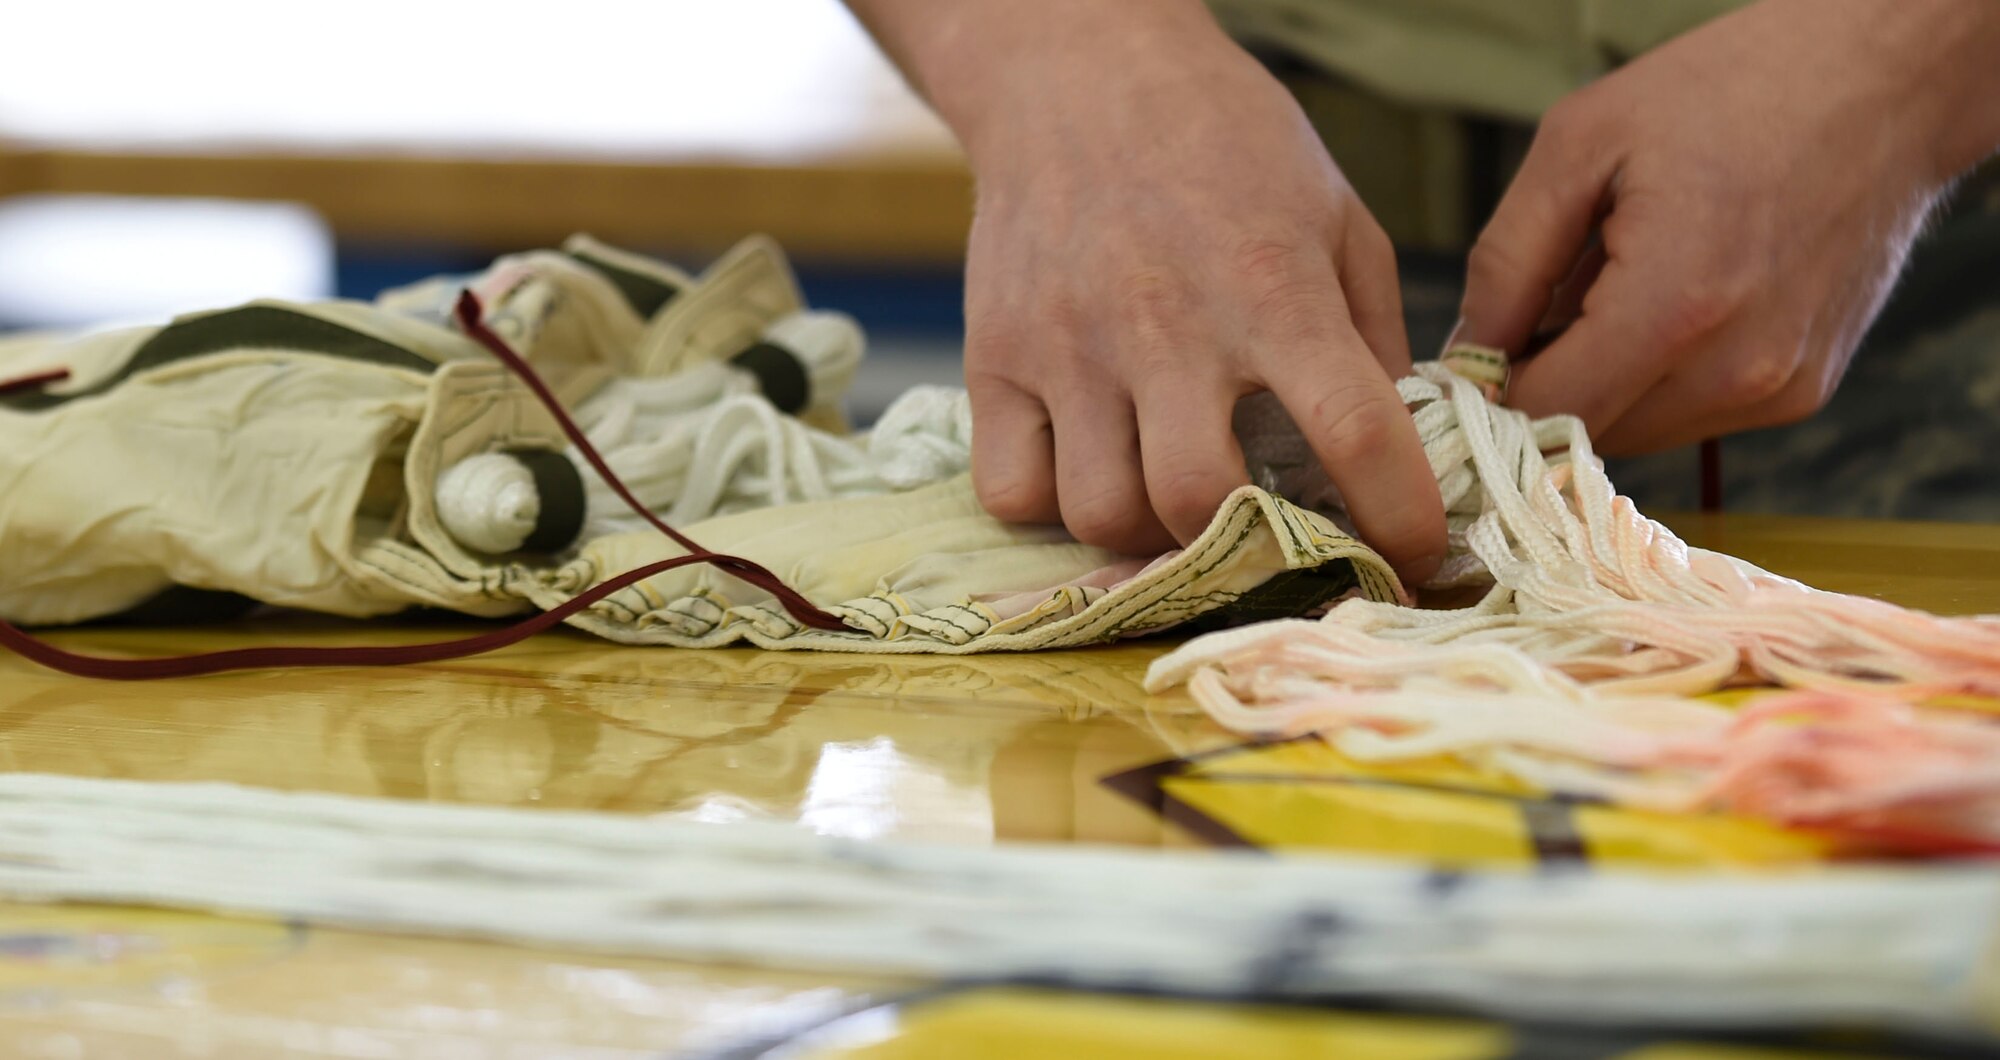 U.S. Air Force Senior Airman Tyler Wineman, 1st Operation Support Squadron aircrew flight equipment technician, stows parachute lines on a T-38 Talon drogue parachute at Joint Base Langley-Eustis, Va., Feb. 27, 2017. The AFE parachute shop inspects parachutes regularly to ensure its proper deployment in case of an emergency. (U.S. Air Force photo by Staff Sgt. Natasha Stannard)